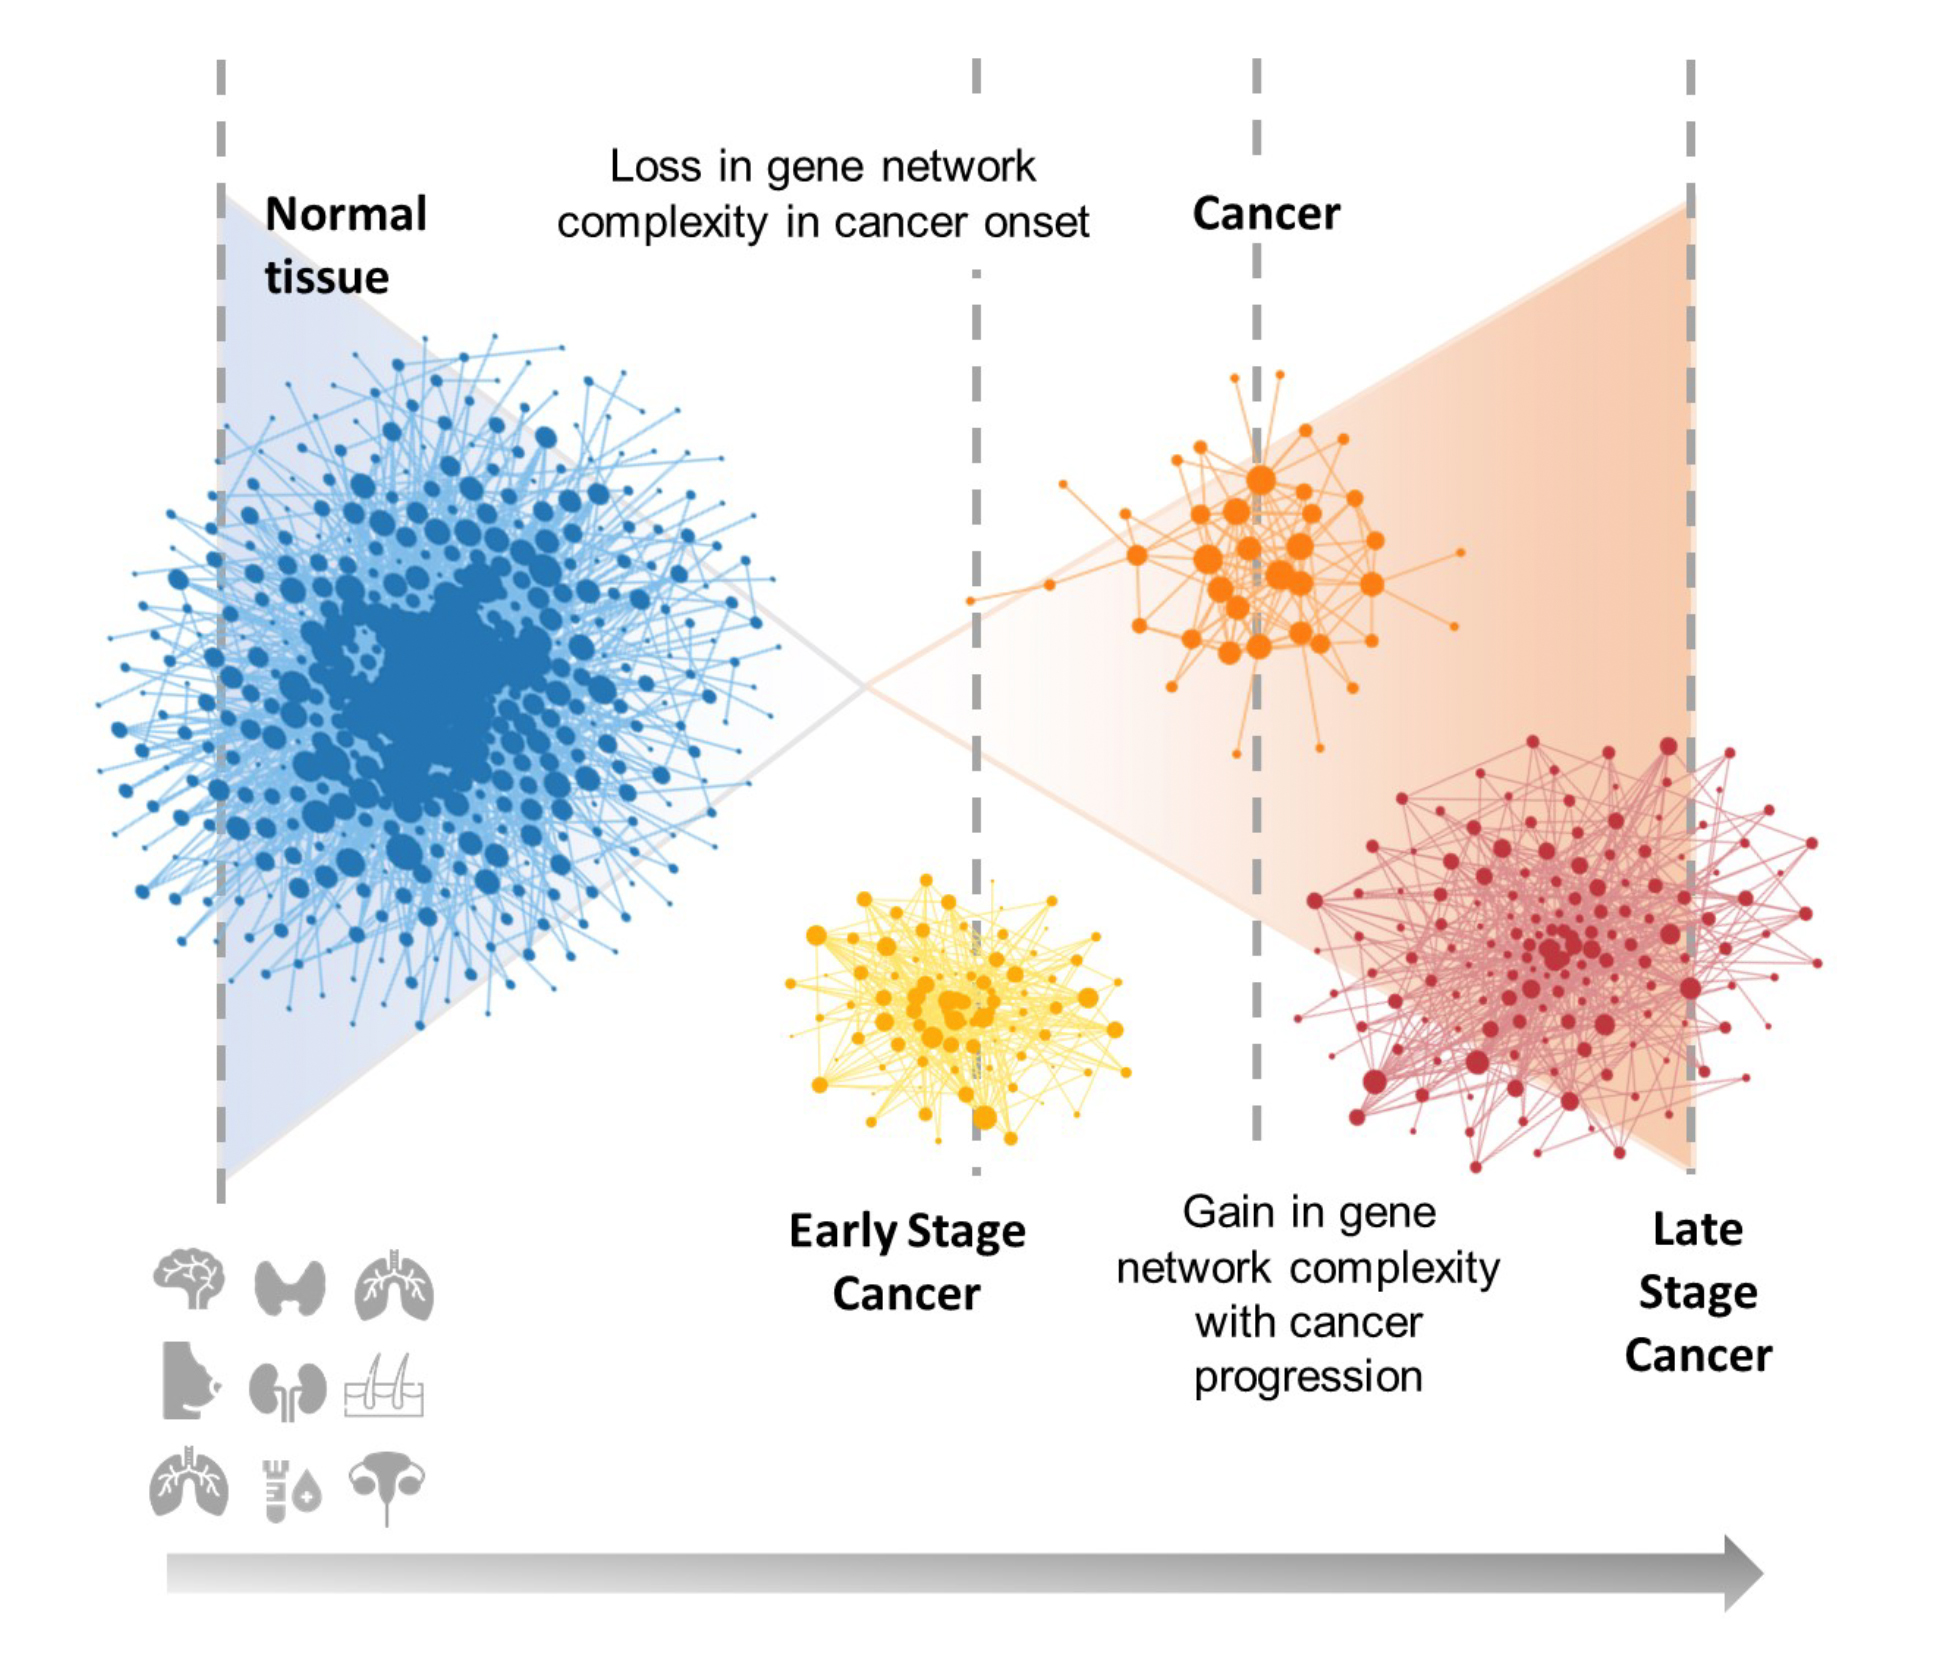 A graphic showing network complexity during various stages of cancer. (Graphic courtesy Zainab Arshad)